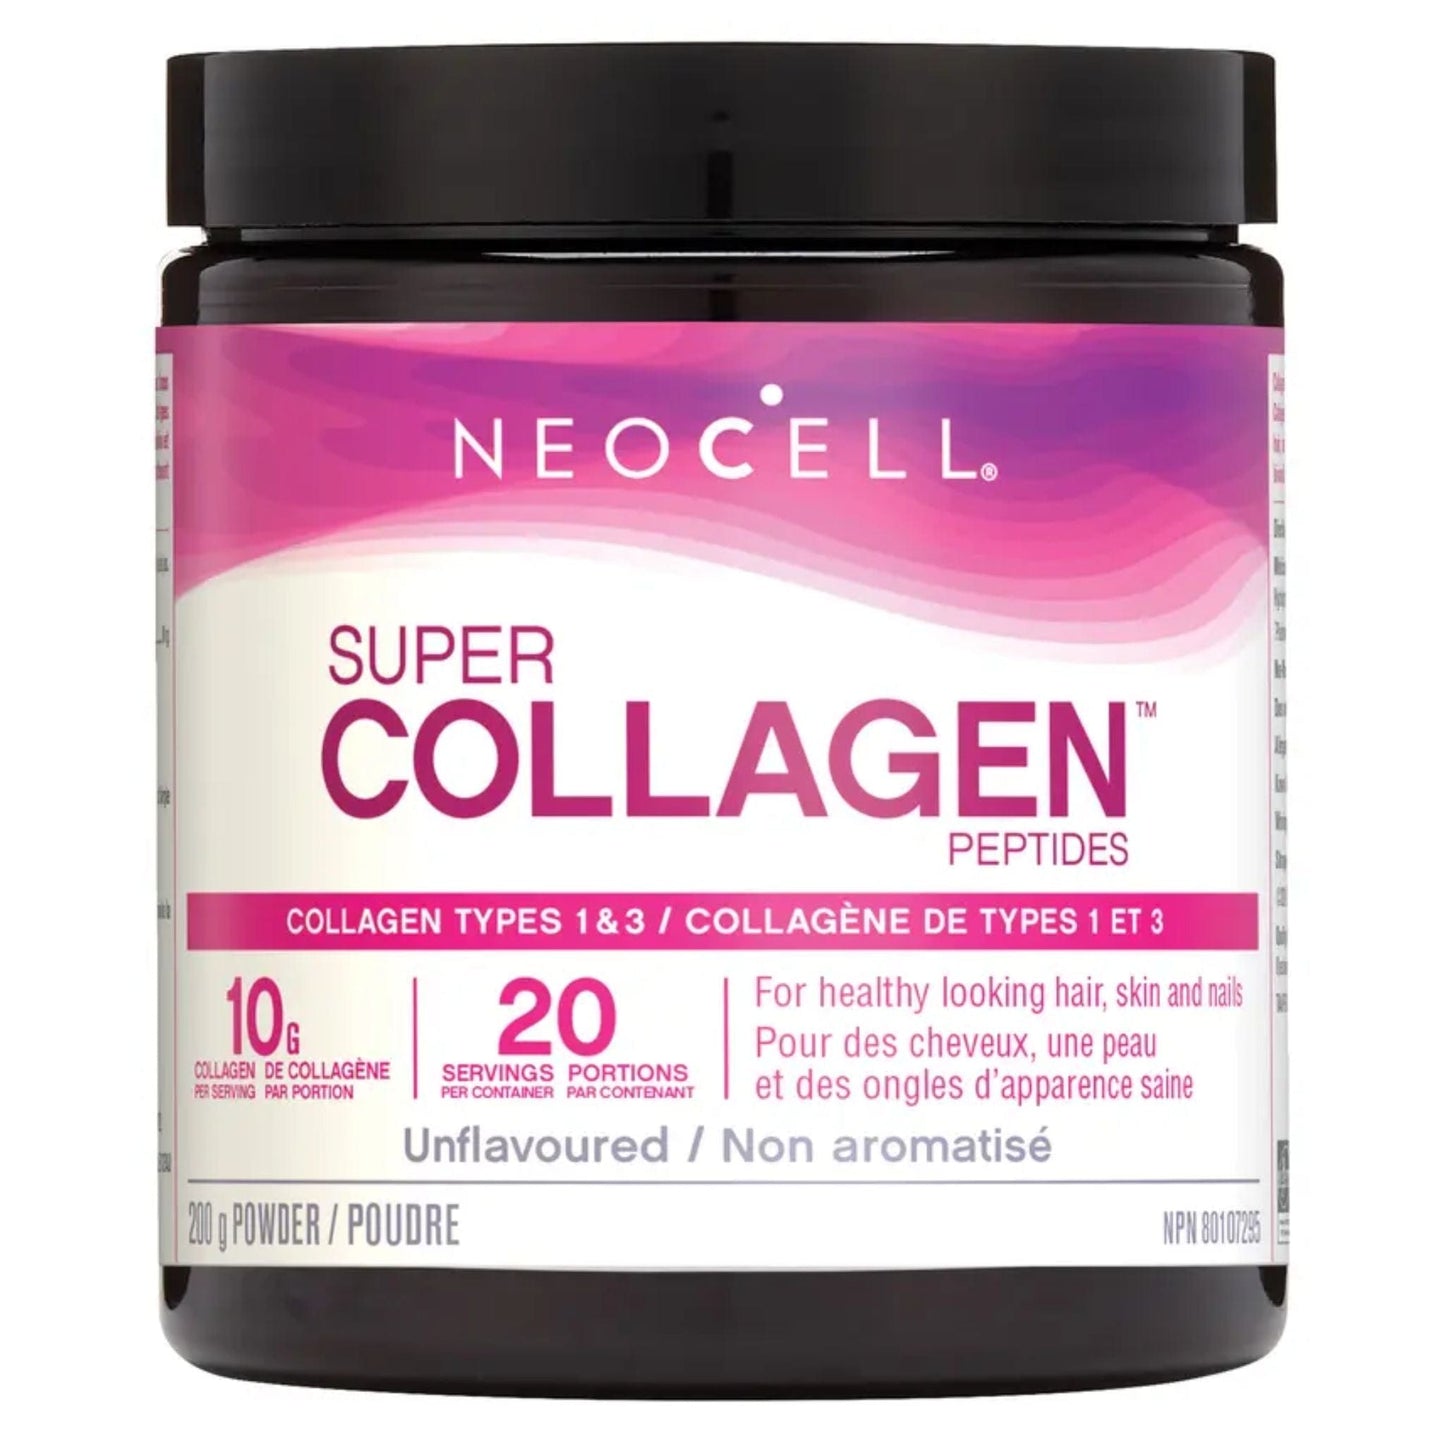 Neocell Super Collagen Peptides Collagen Types 1 and 3 Powder // Unflavoured